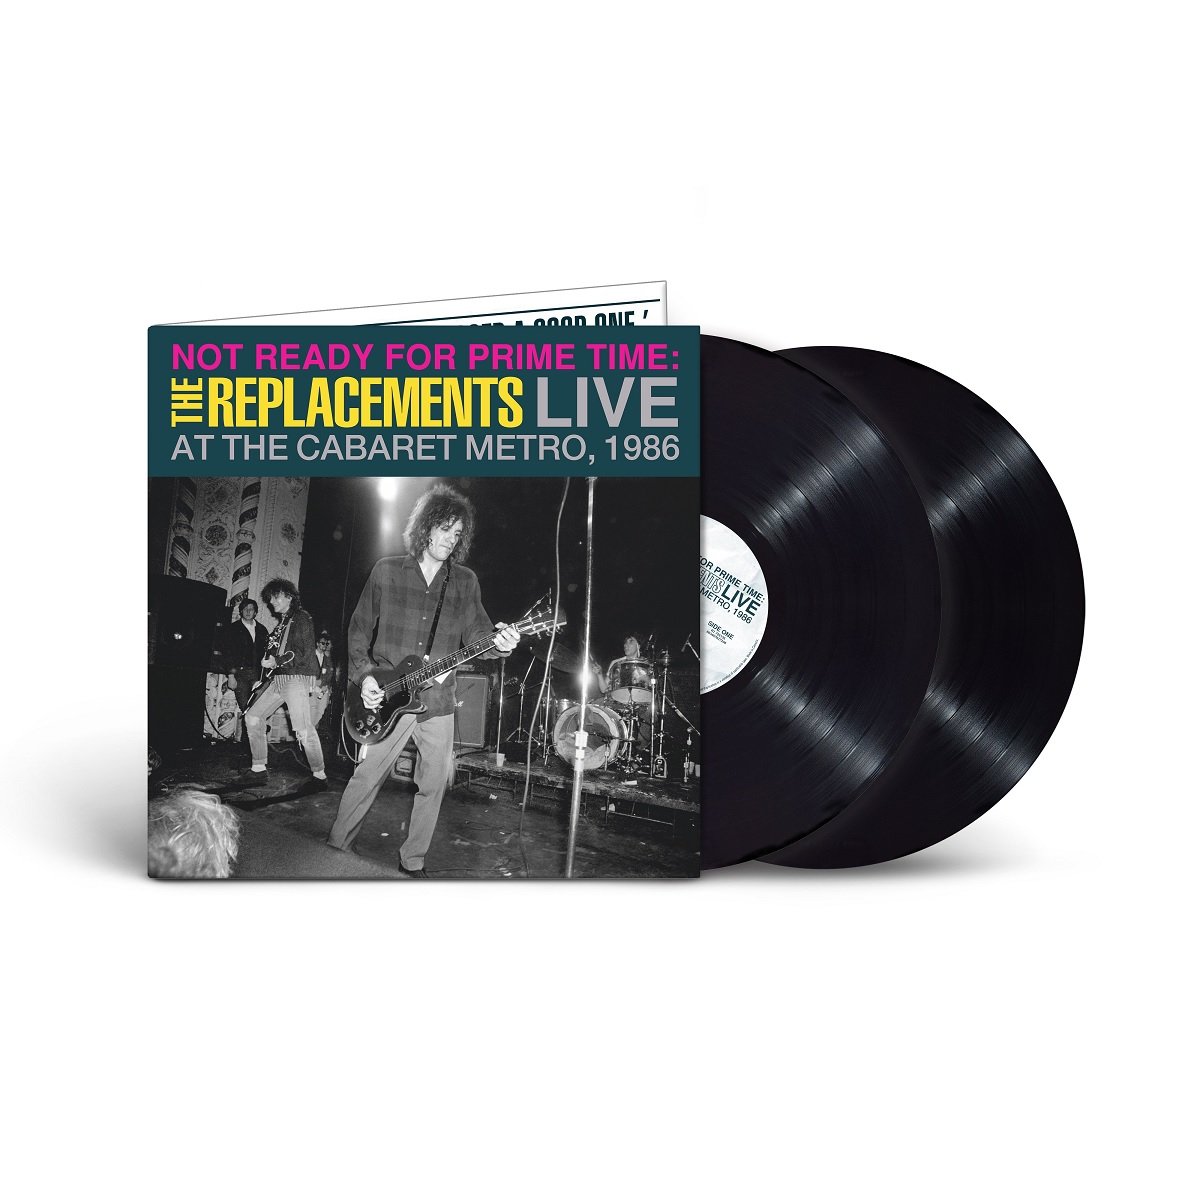 CD Shop - REPLACEMENTS NOT READY FOR PRIME TIME: LIVE AT THE CABARET METRO, CHICAGO, IL, JANUARY 11, 1986